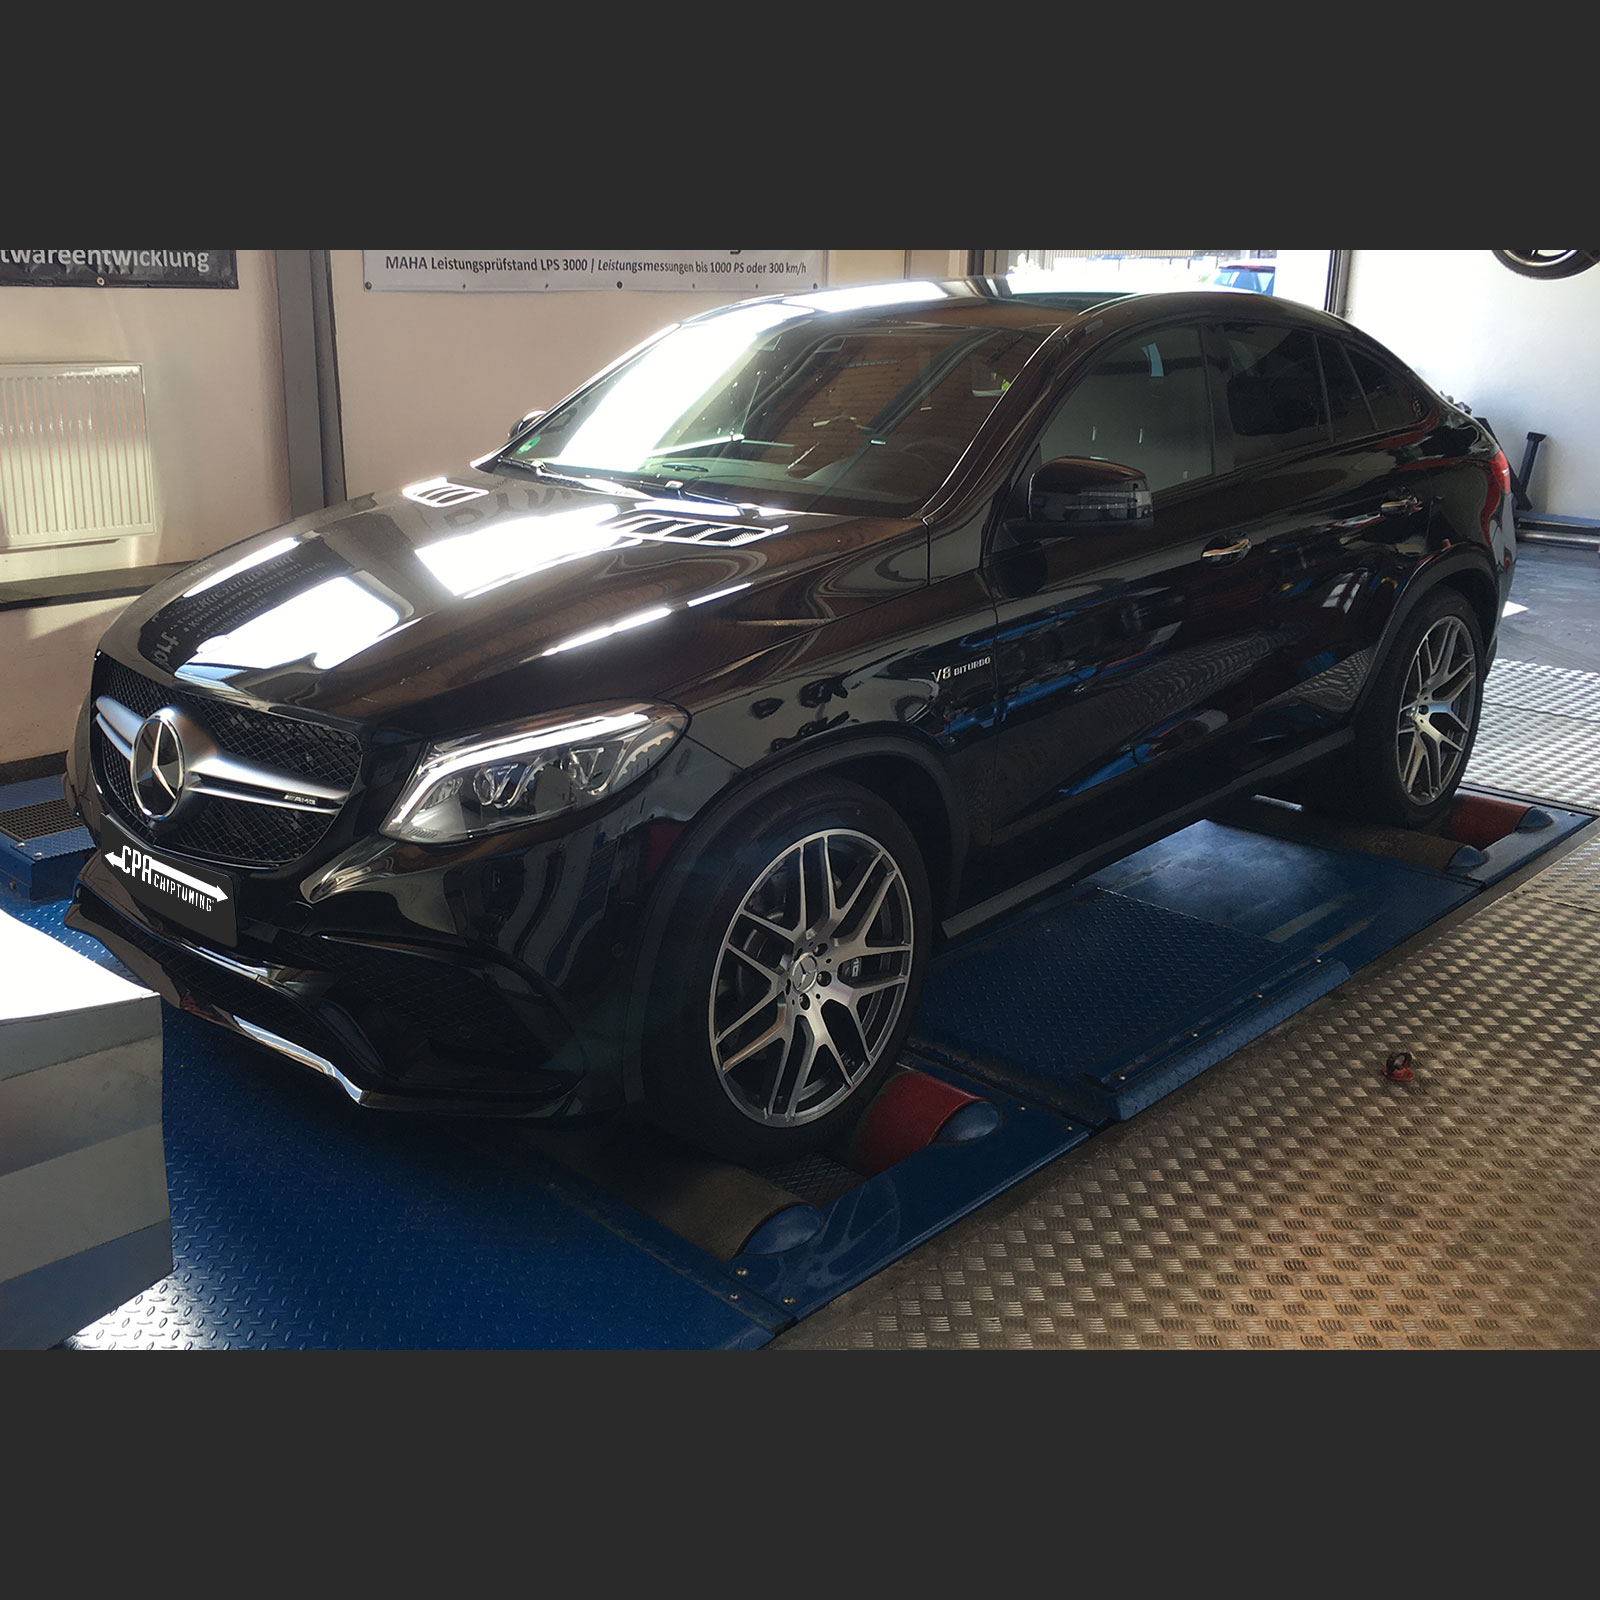 Batman would be jealous: GLE 63 4MATIC Coupe on the dyno